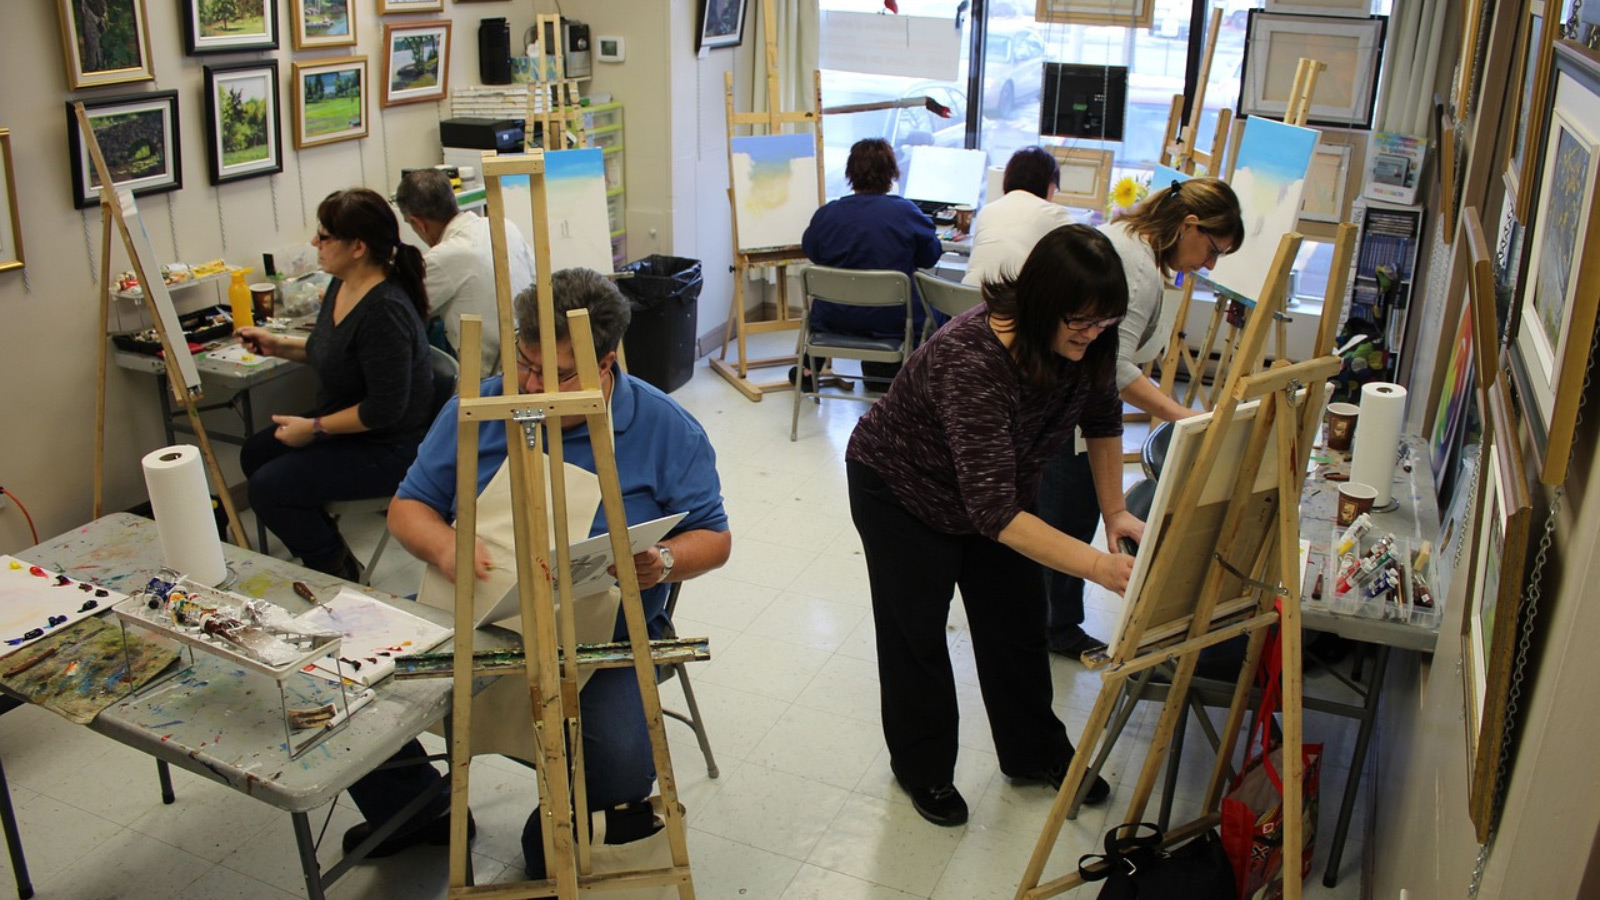 Group of people in a room painting on canvases.